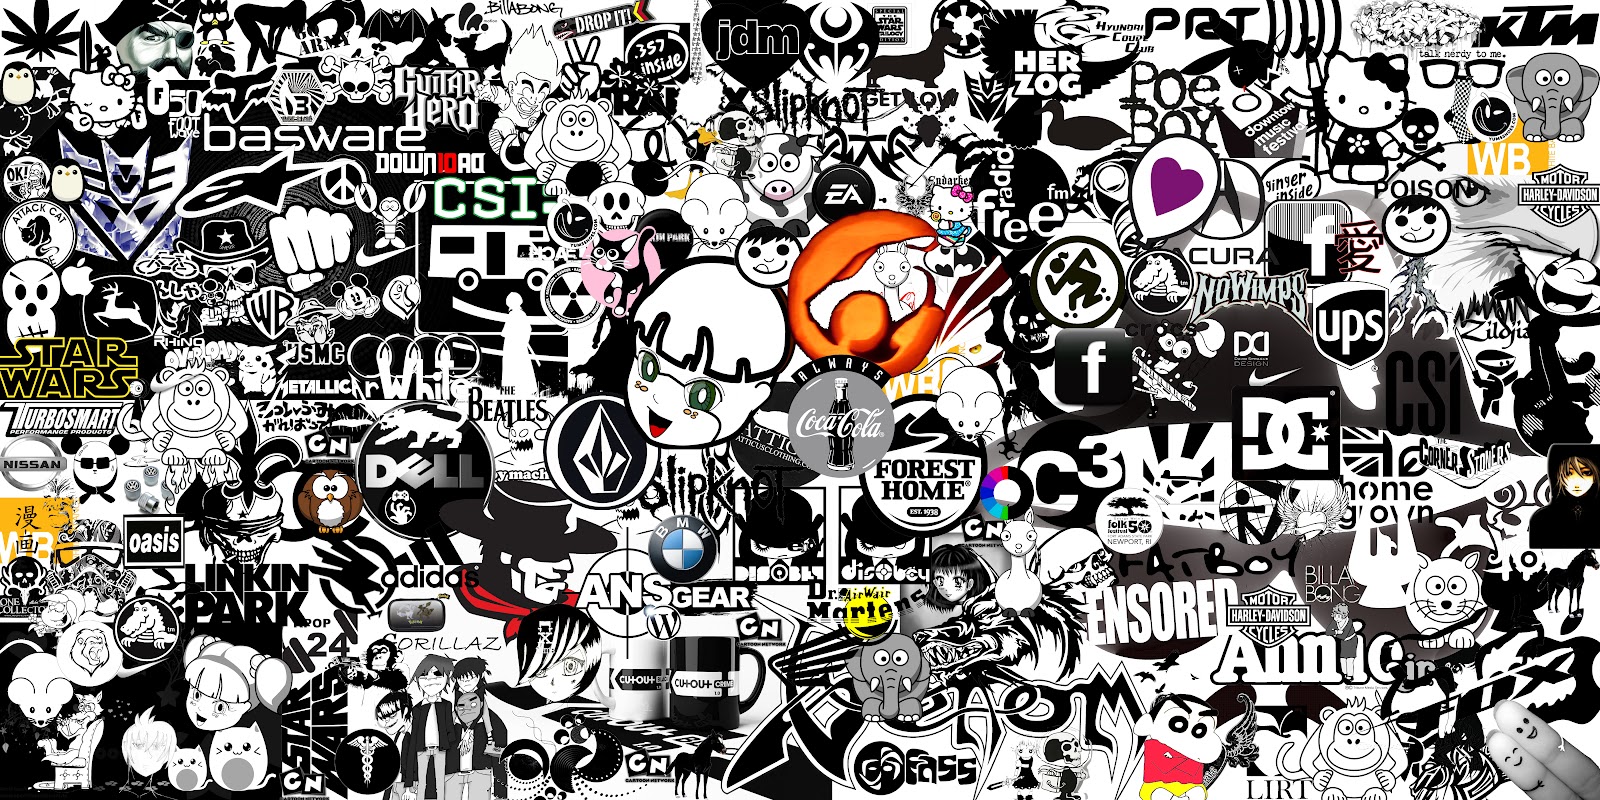 Pictures Of Sticker Bomb Wallpaper Black And White - Illustration , HD Wallpaper & Backgrounds